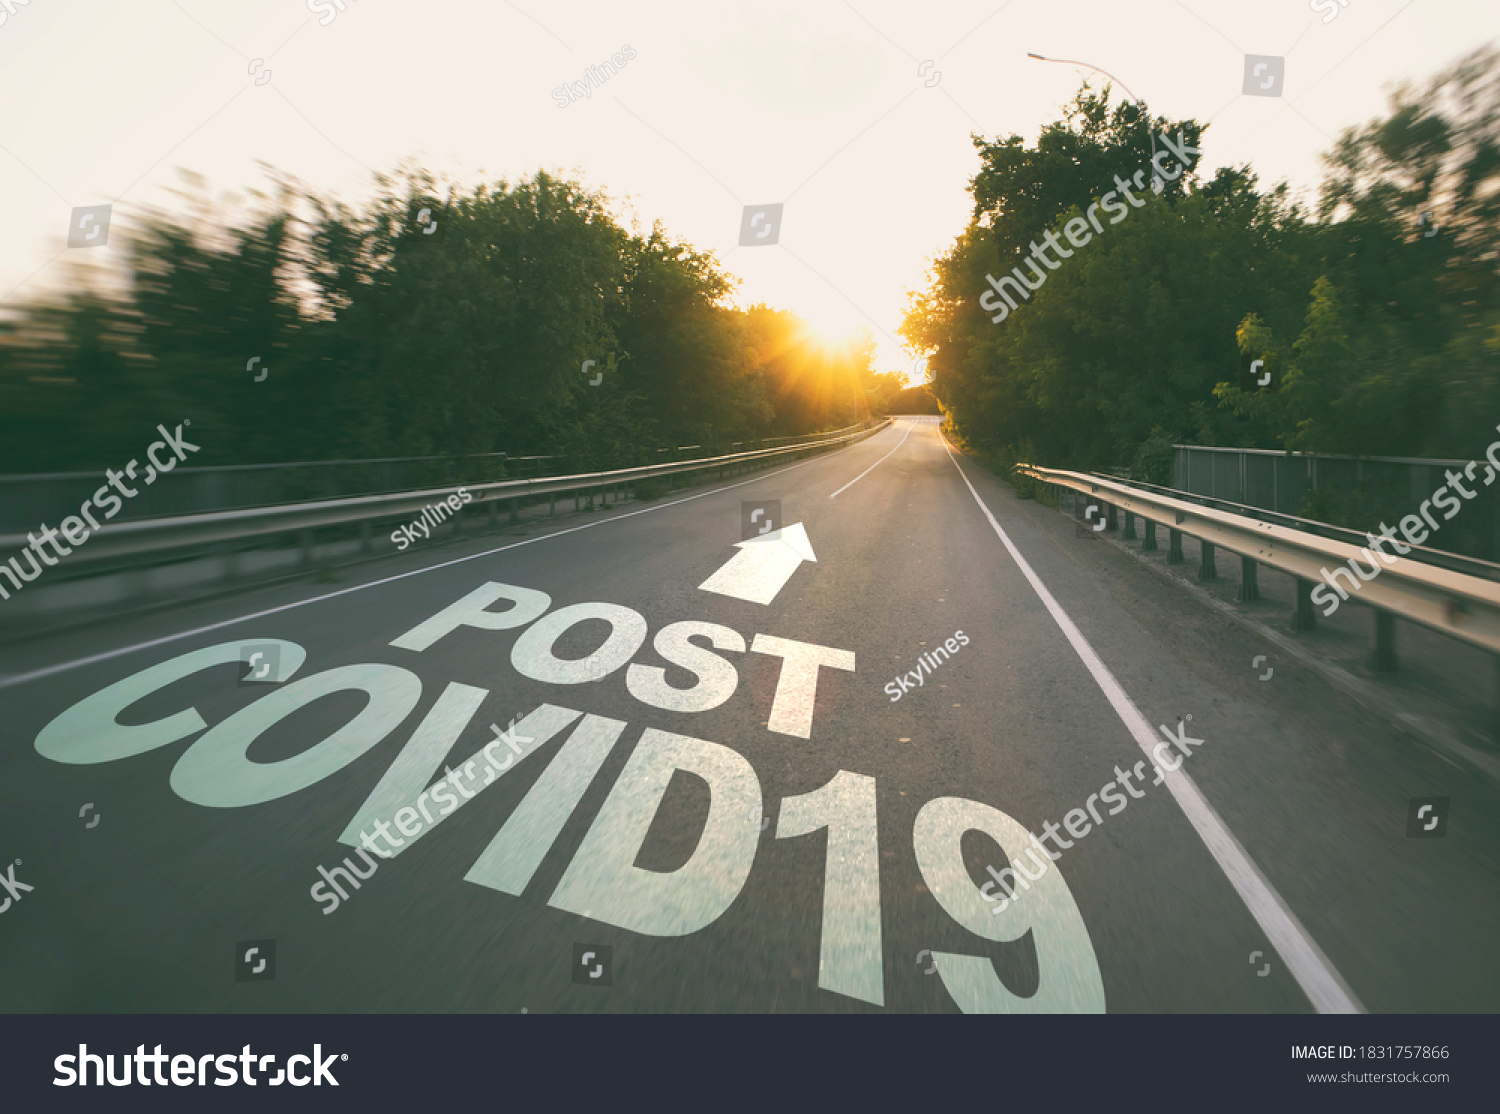 The empty road in the forest and the text on the asphalt "Post covid19". #1831757866